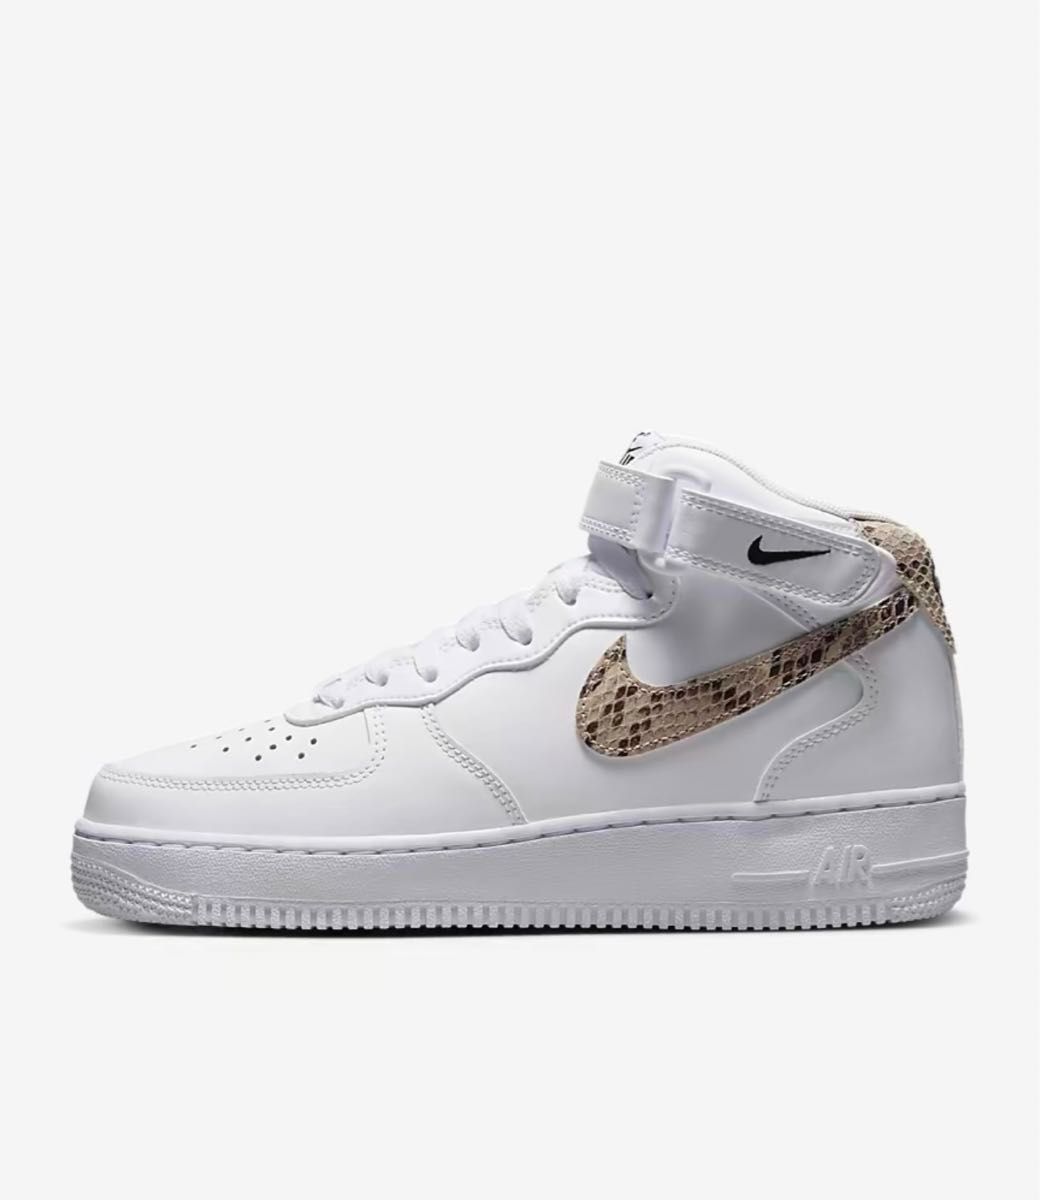 NIKE AIR FORCE1  MID パイソン スネーク 蛇柄 23.5